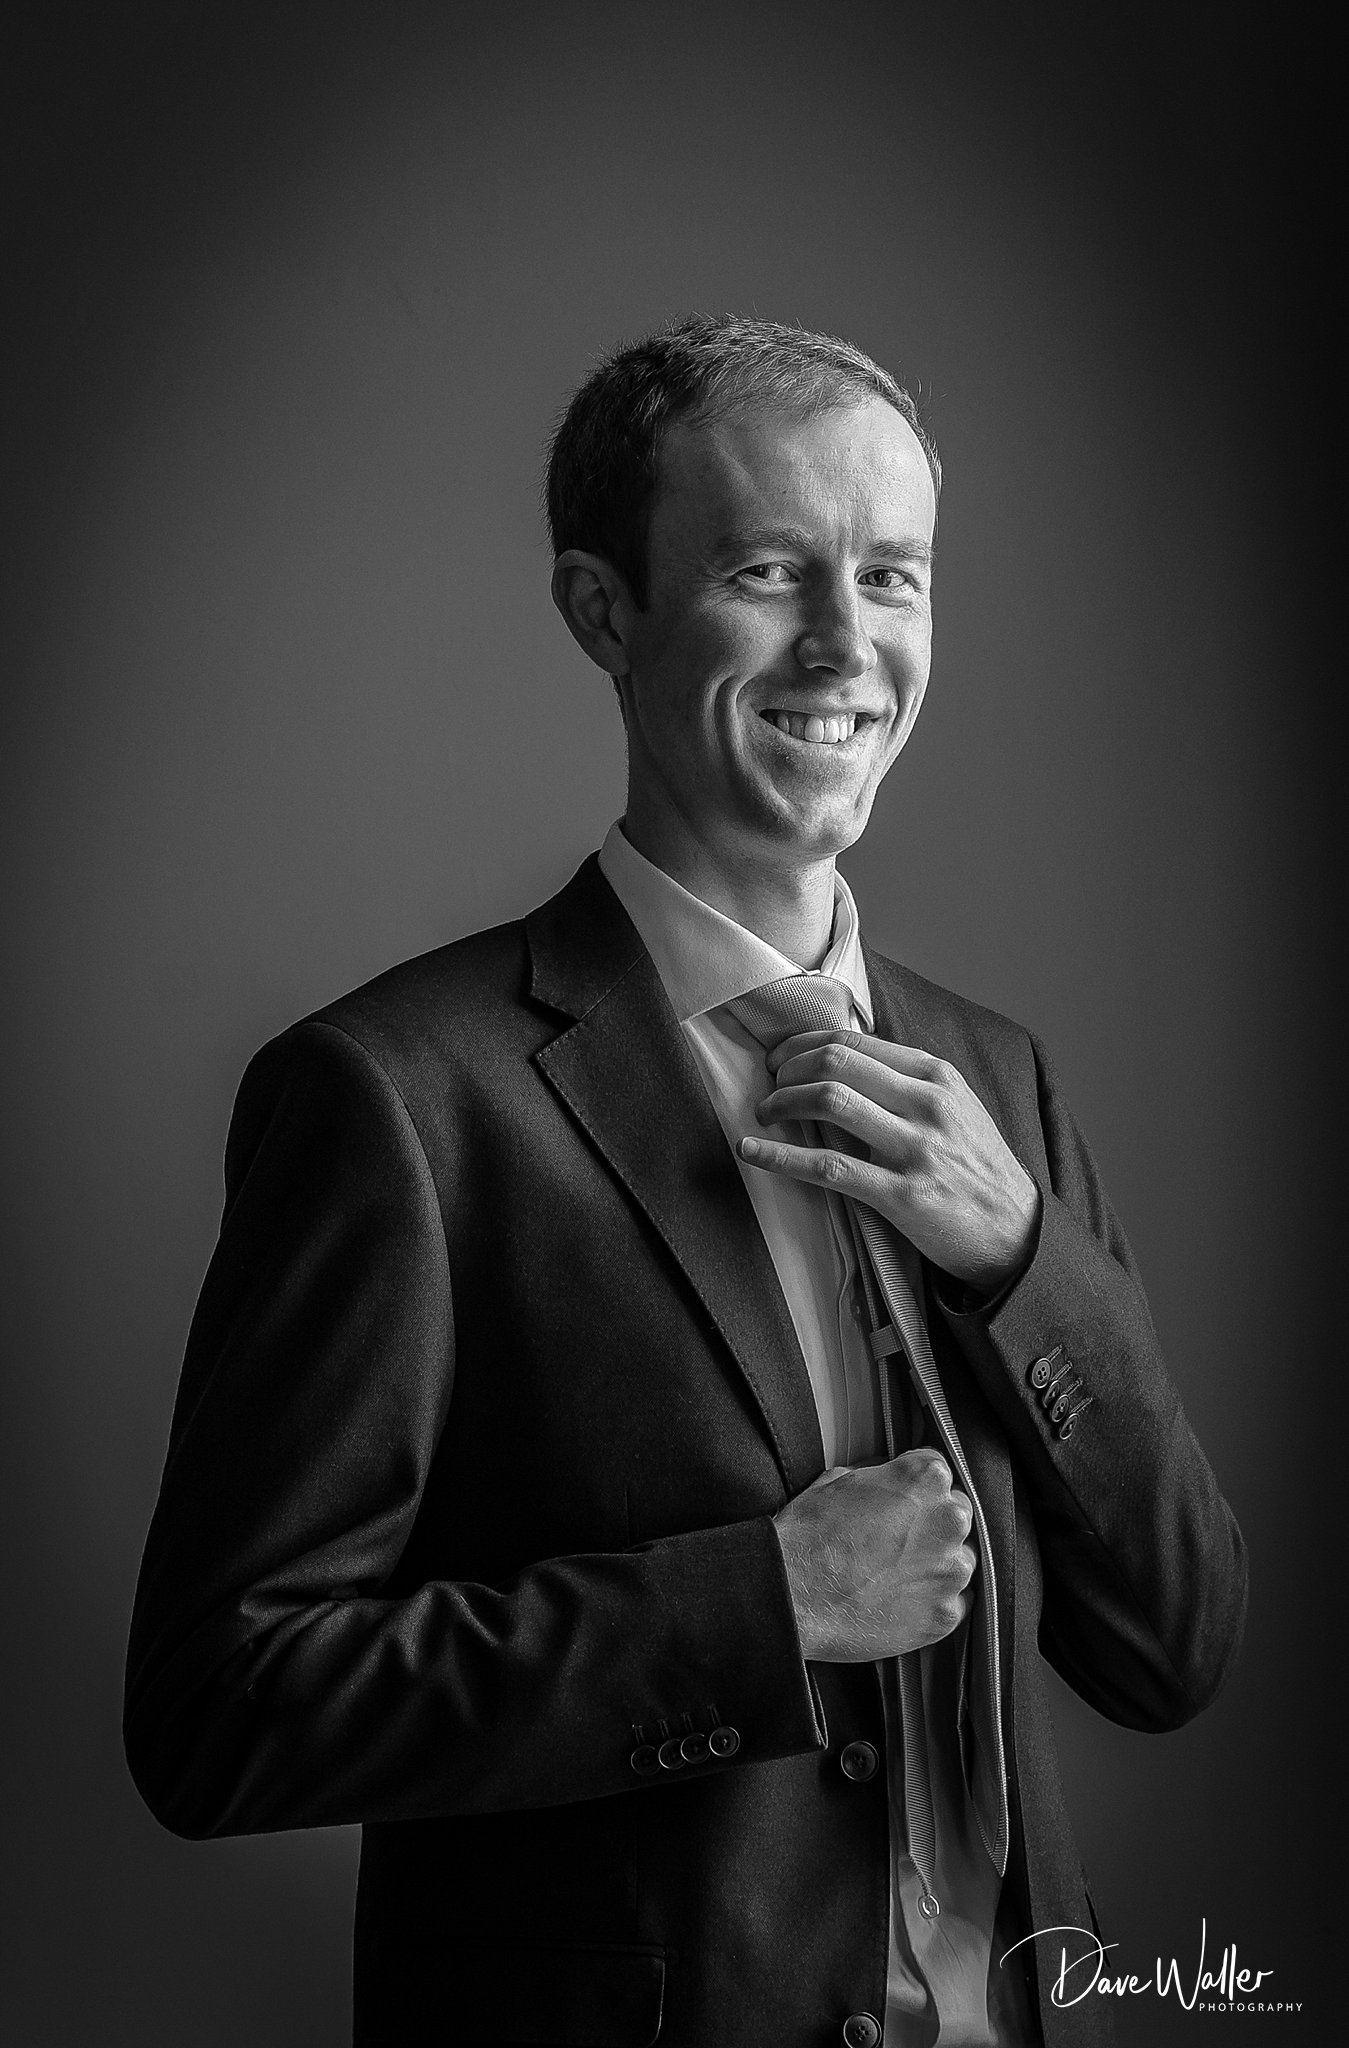 A monochrome portrait of a confident man in a suit, smiling and casually adjusting his tie at Rudding Park.